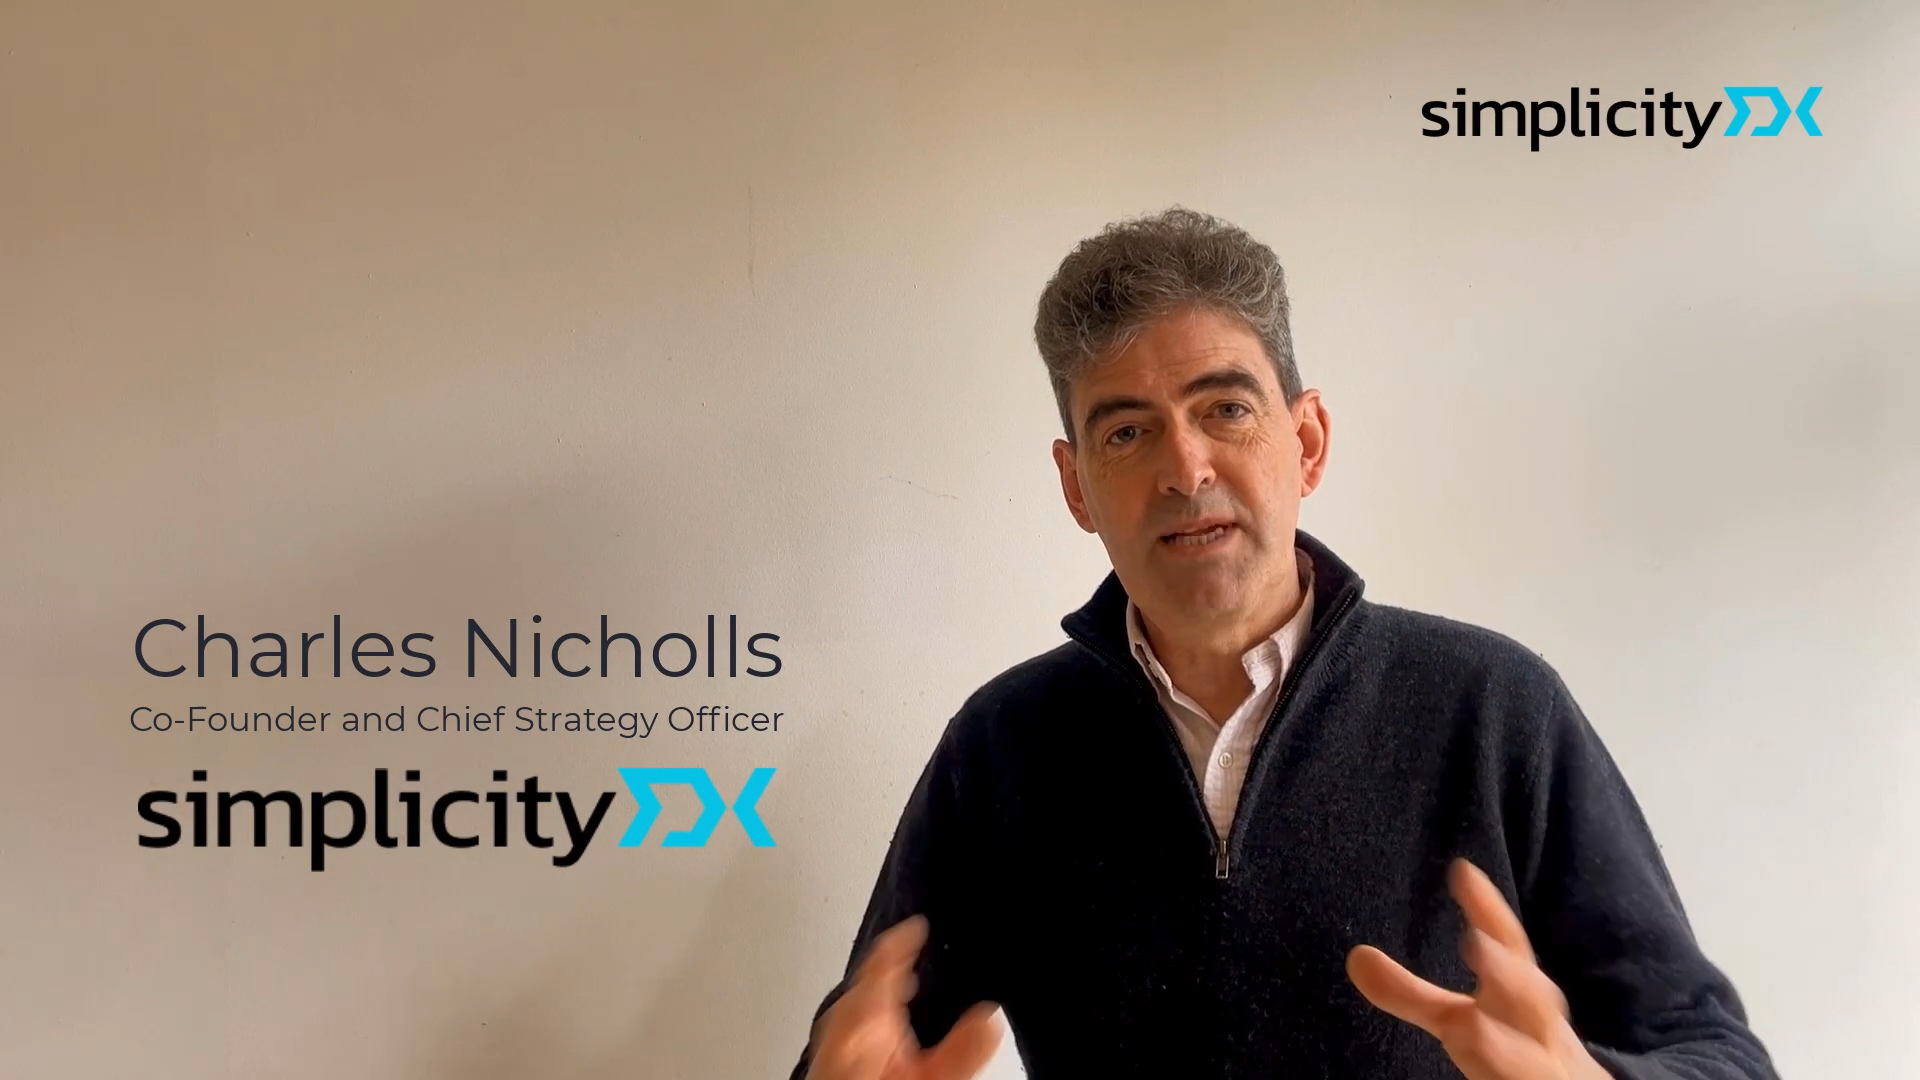 In this 2-minute video, Charles Nicholls, chief strategy officer at SimplicityDX, provides a summary of the results of our 2022 State of Social Commerce impact study.